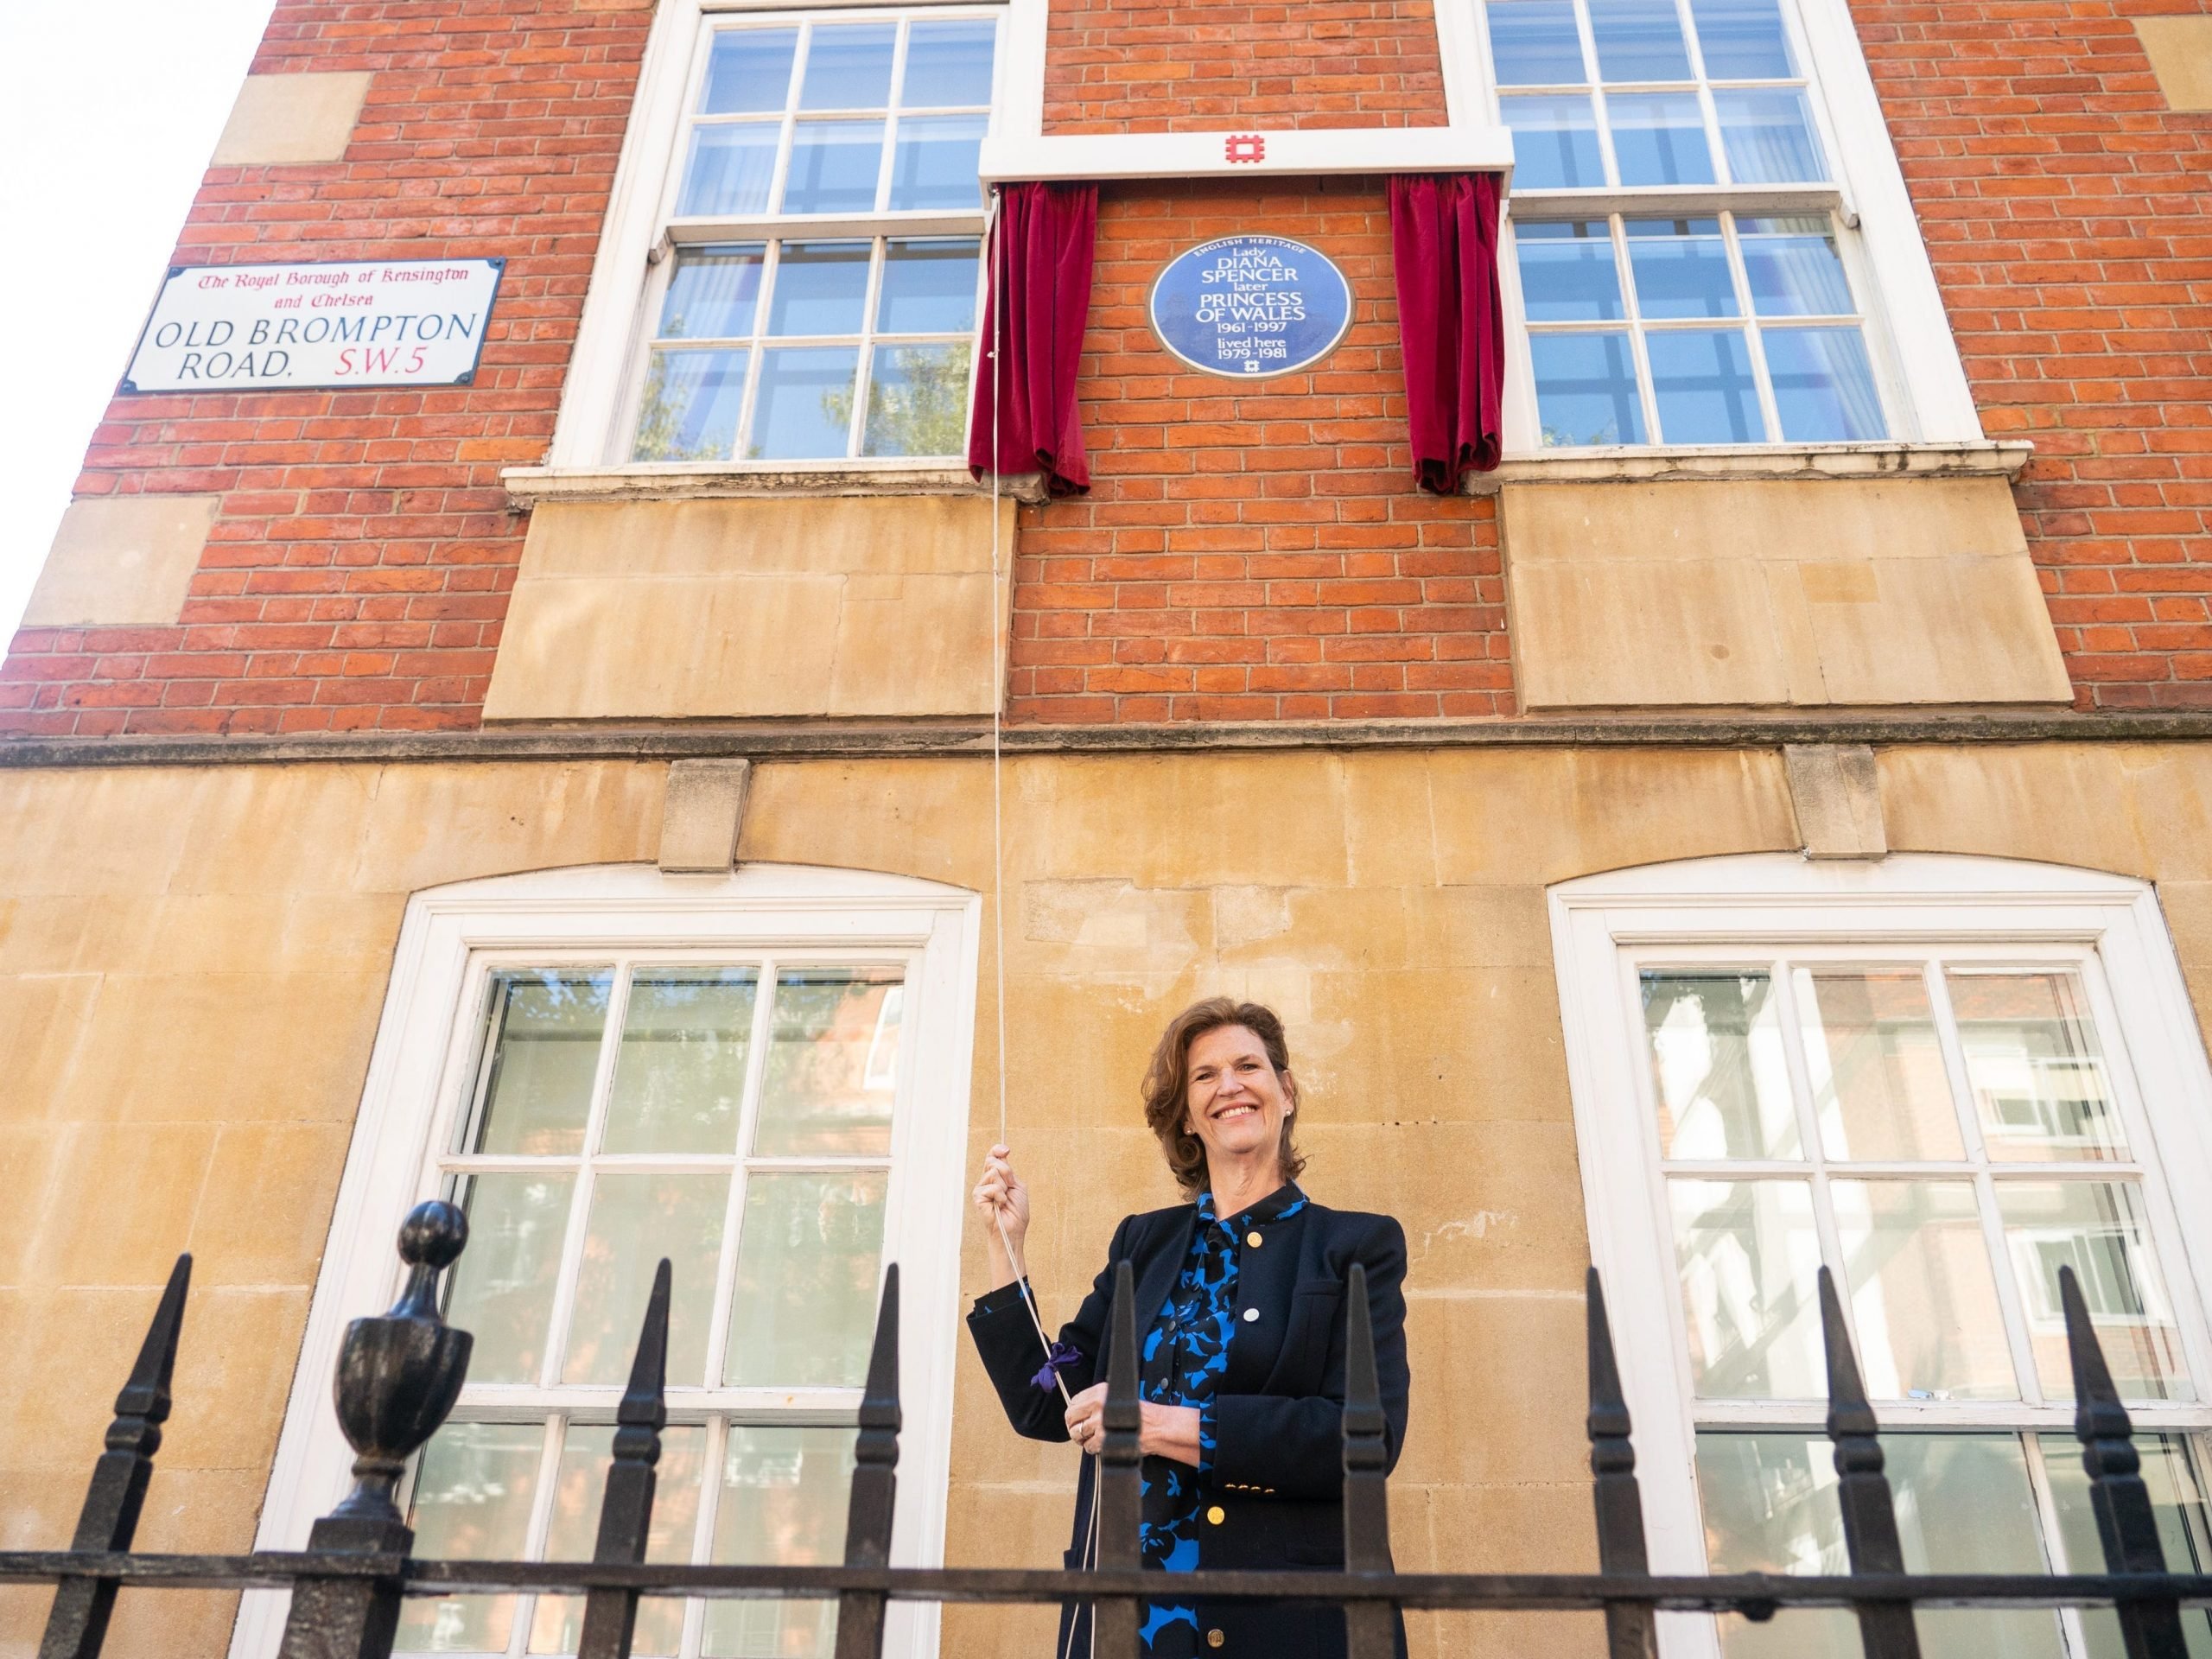 Princess Diana's former flatmate Virginia Clarke unveils a English Heritage blue plaque to Diana, Princess of Wales, outside Coleherne Court, Old Brompton Road, London. Picture date: Wednesday September 29, 2021.